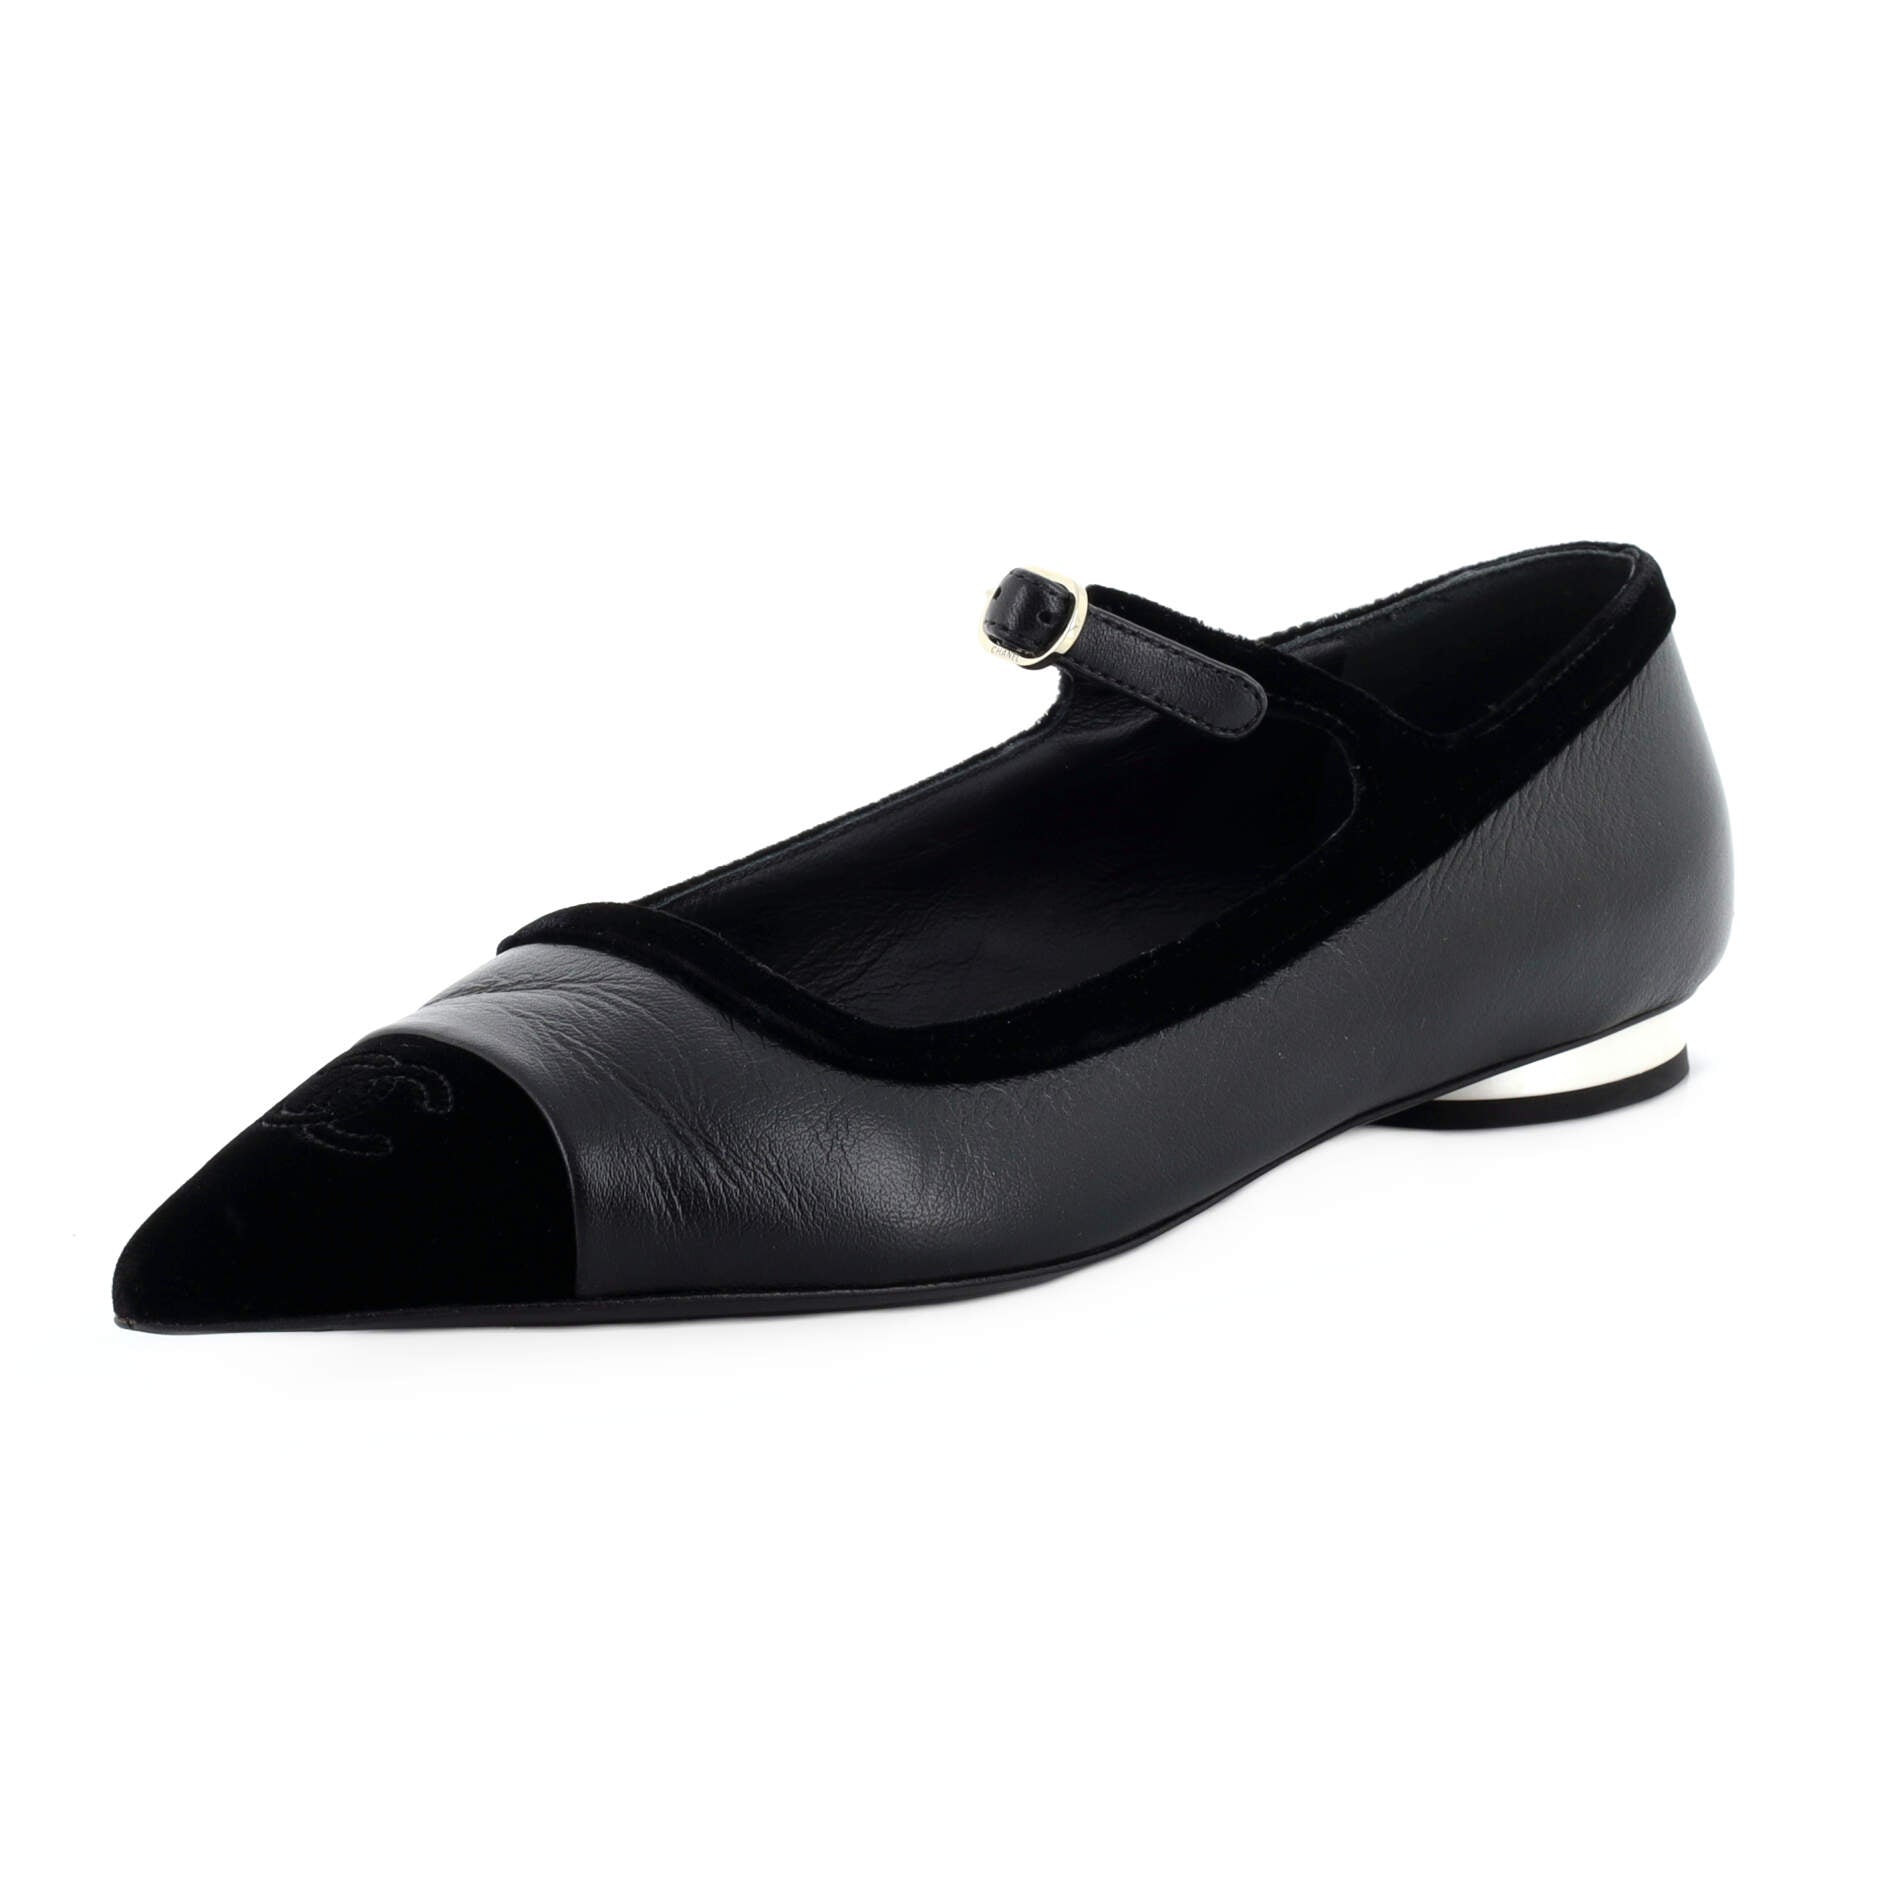 CHANEL Women's CC Cap Toe Bow Ballerina Flats Leather and Patent